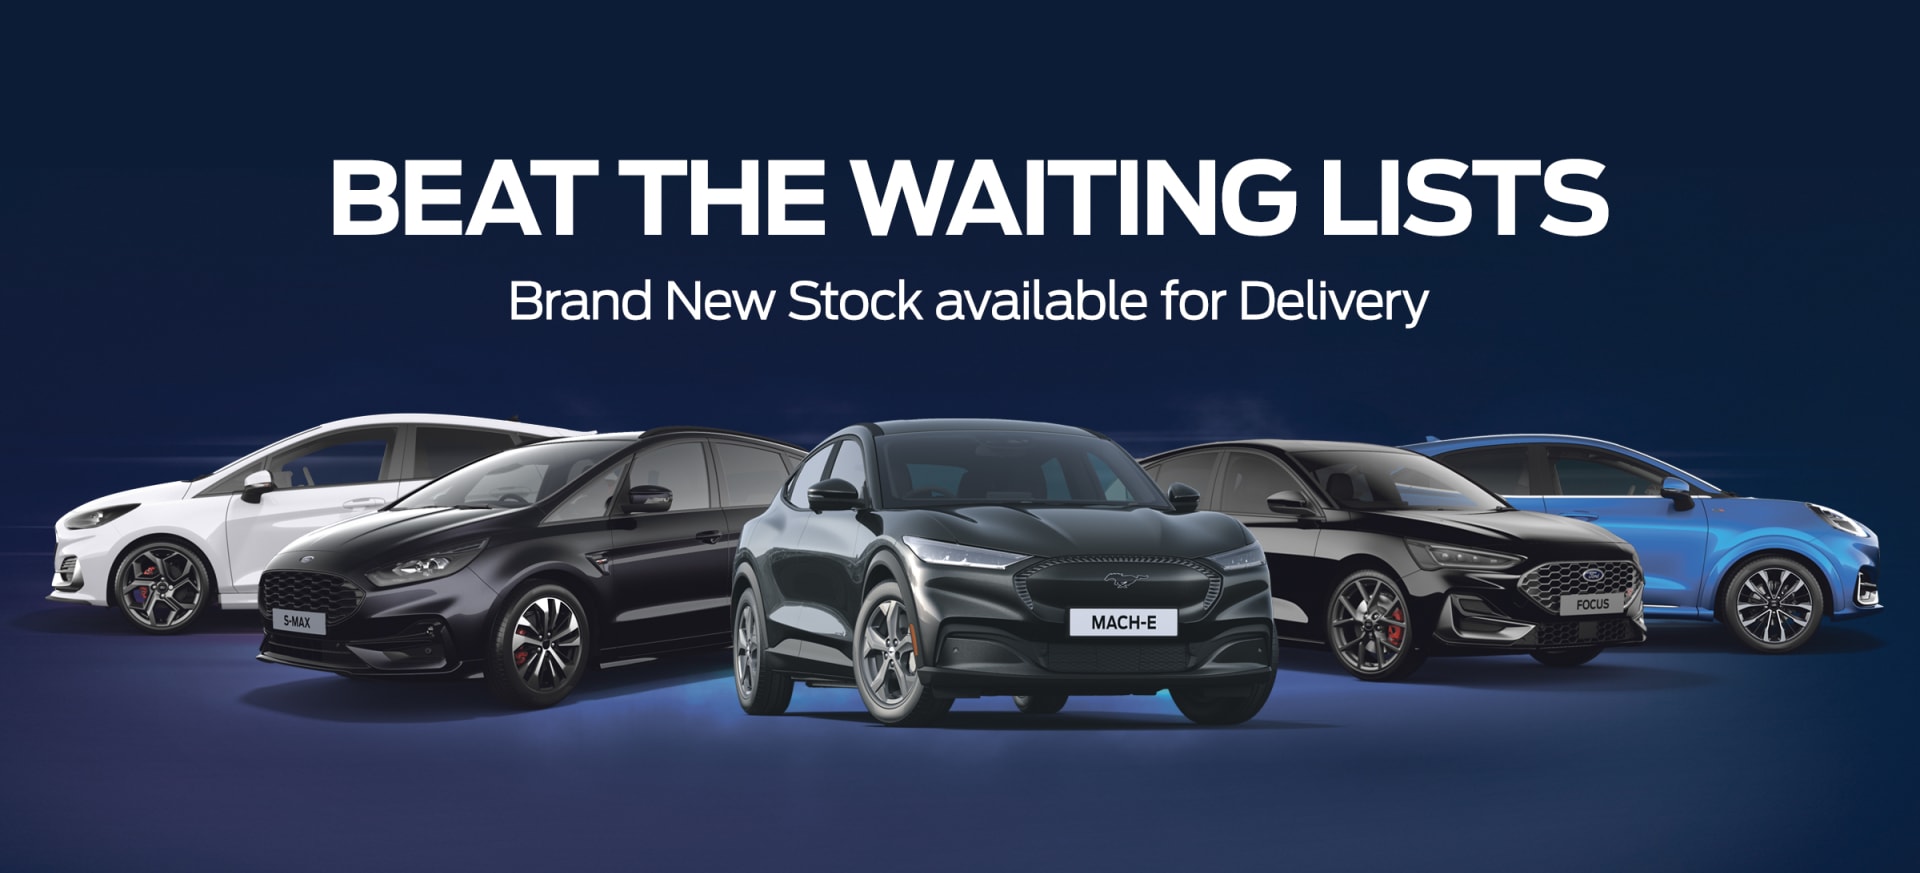 Park's Ford Brand New Offers In Stock For Delivery